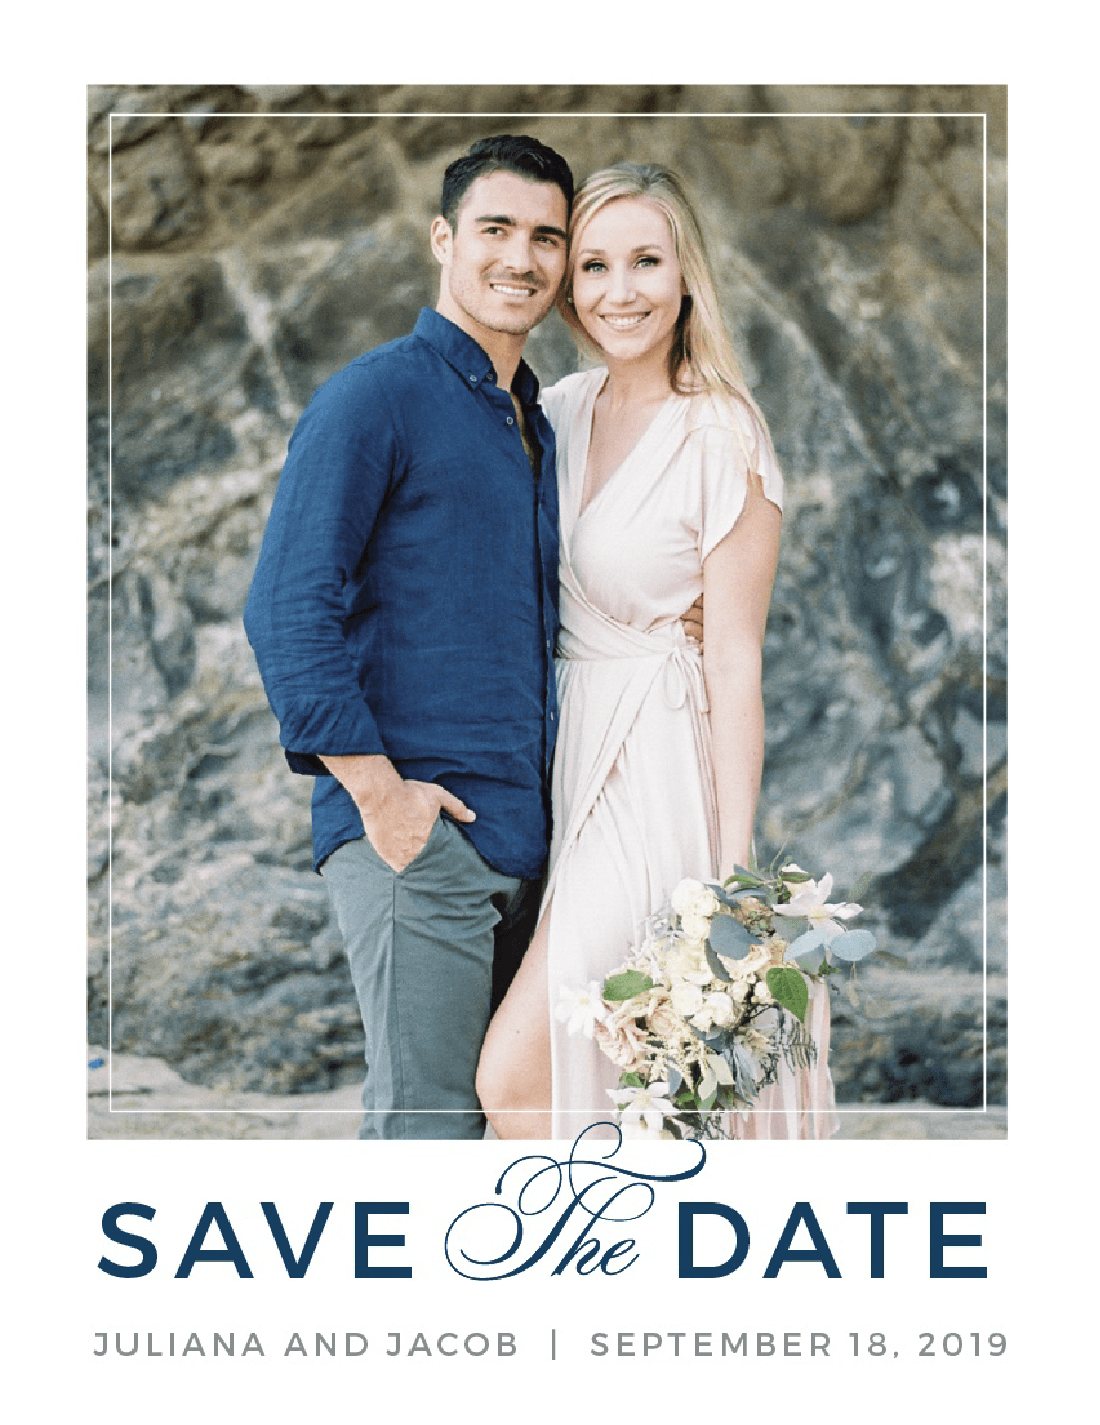 Save The Date Image